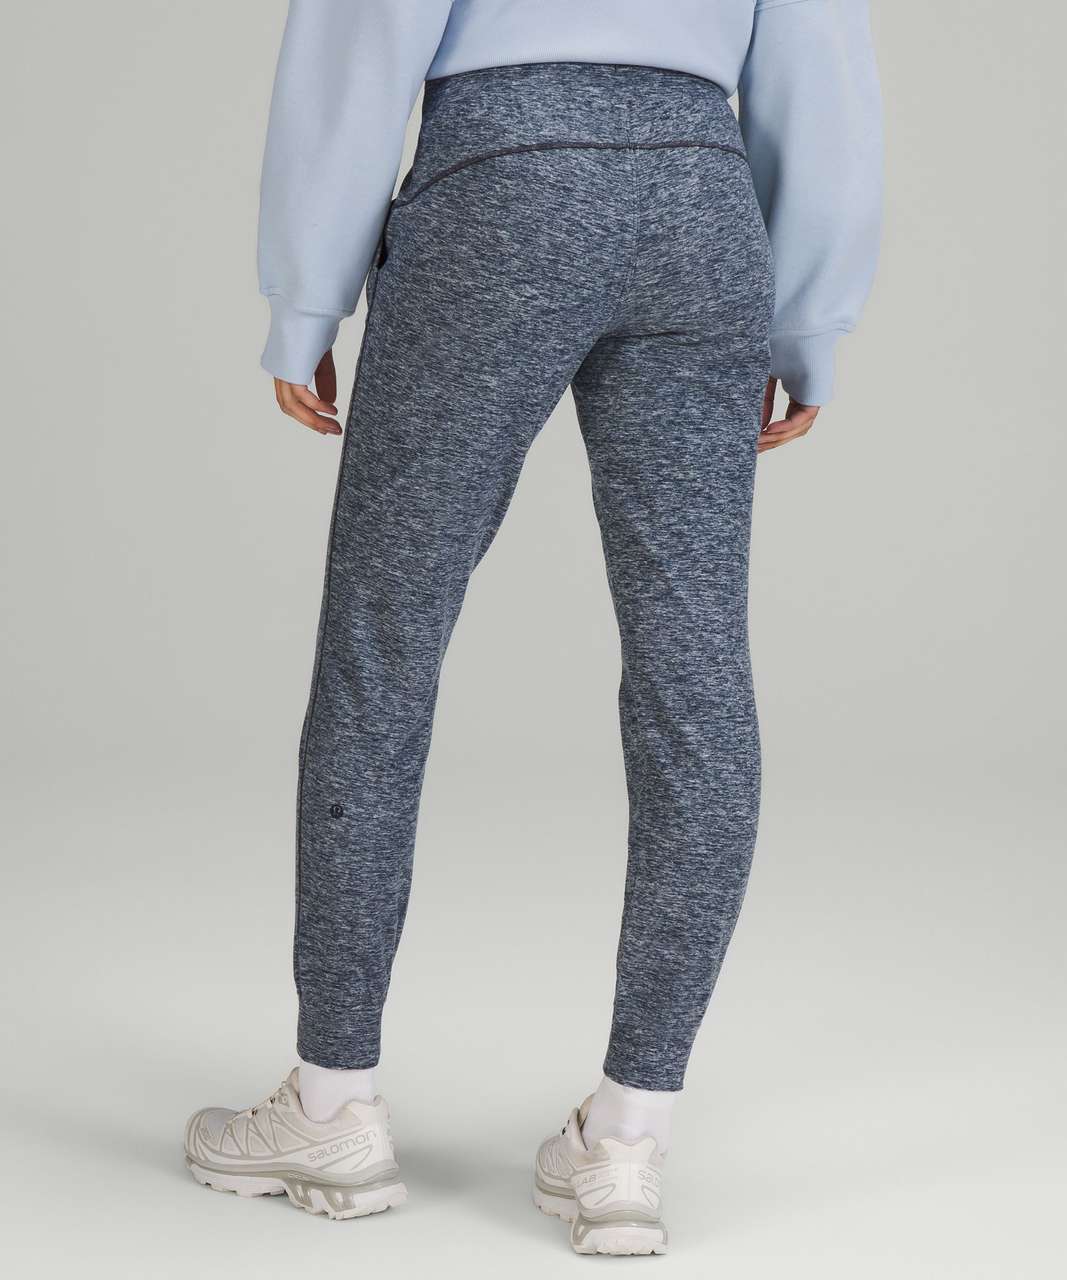 Which joggers should I keep? Ready to Fleece (6) vs Ready to Rulu